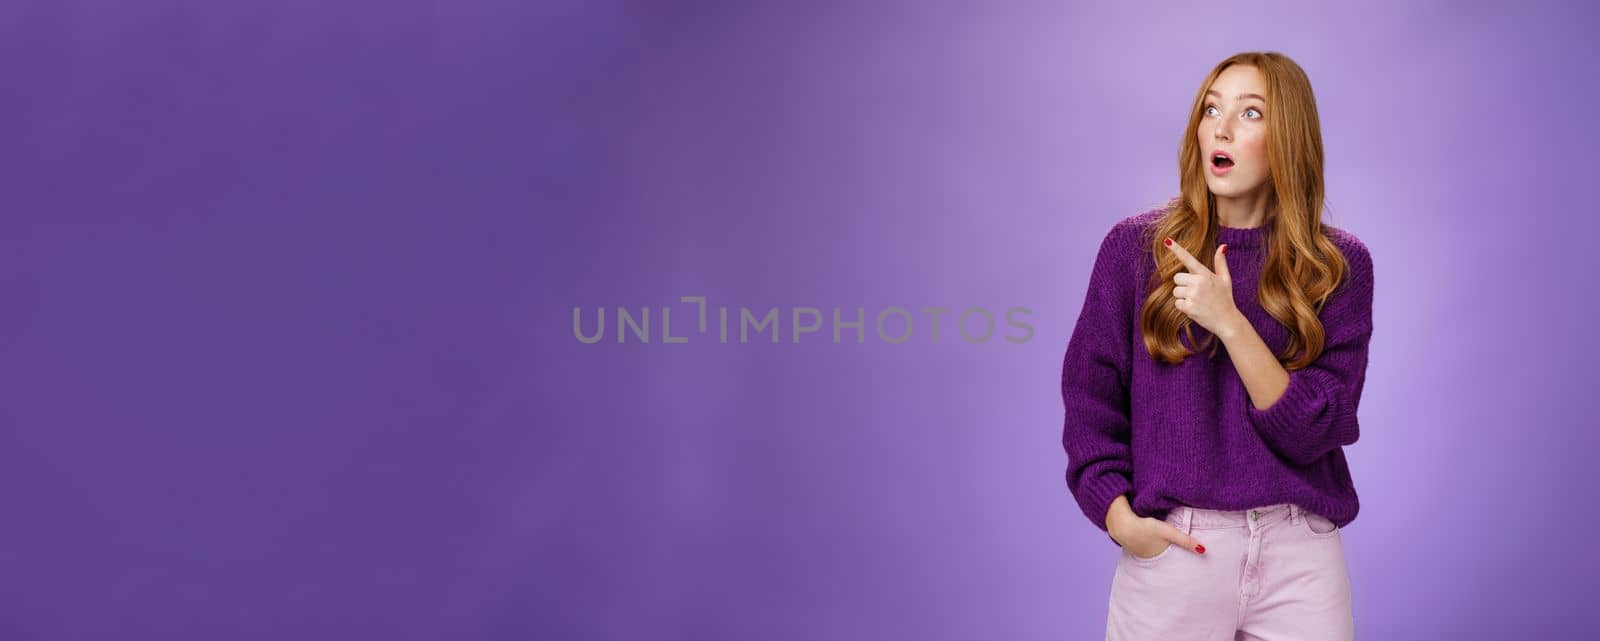 Girl surprised and thrilled as seing unbelievable scene. Portrait of impressed and shocked good-looking ginger woman in purple sweater gasping from amazement pointing, looking left intrigued.